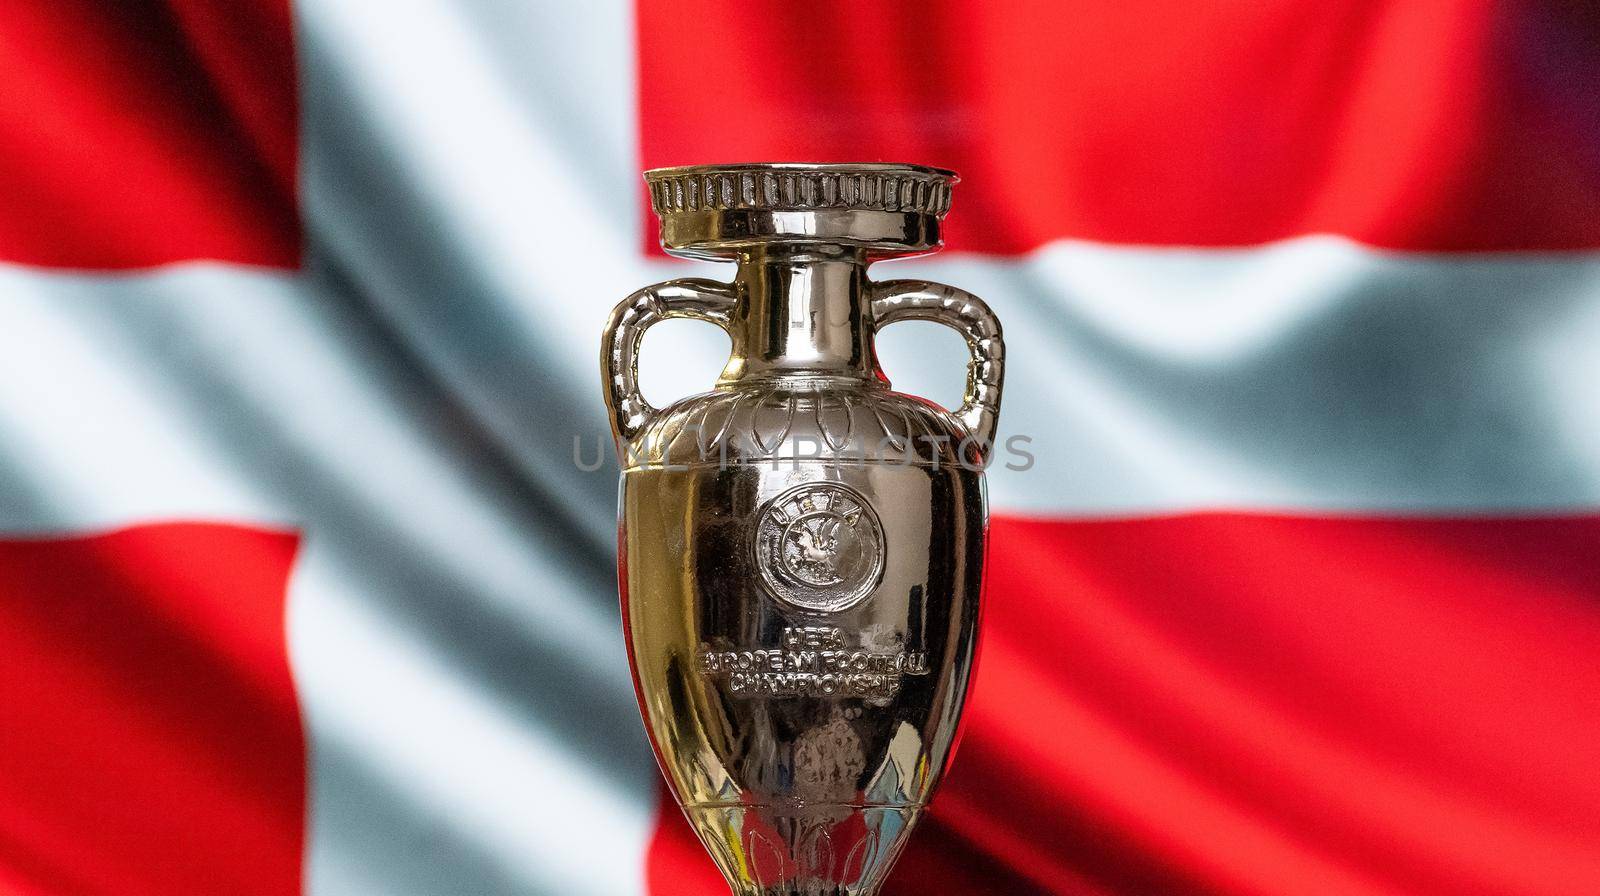 April 10, 2021. Copenhagen, Denmark. UEFA European Championship Cup with the Danish flag in the background.